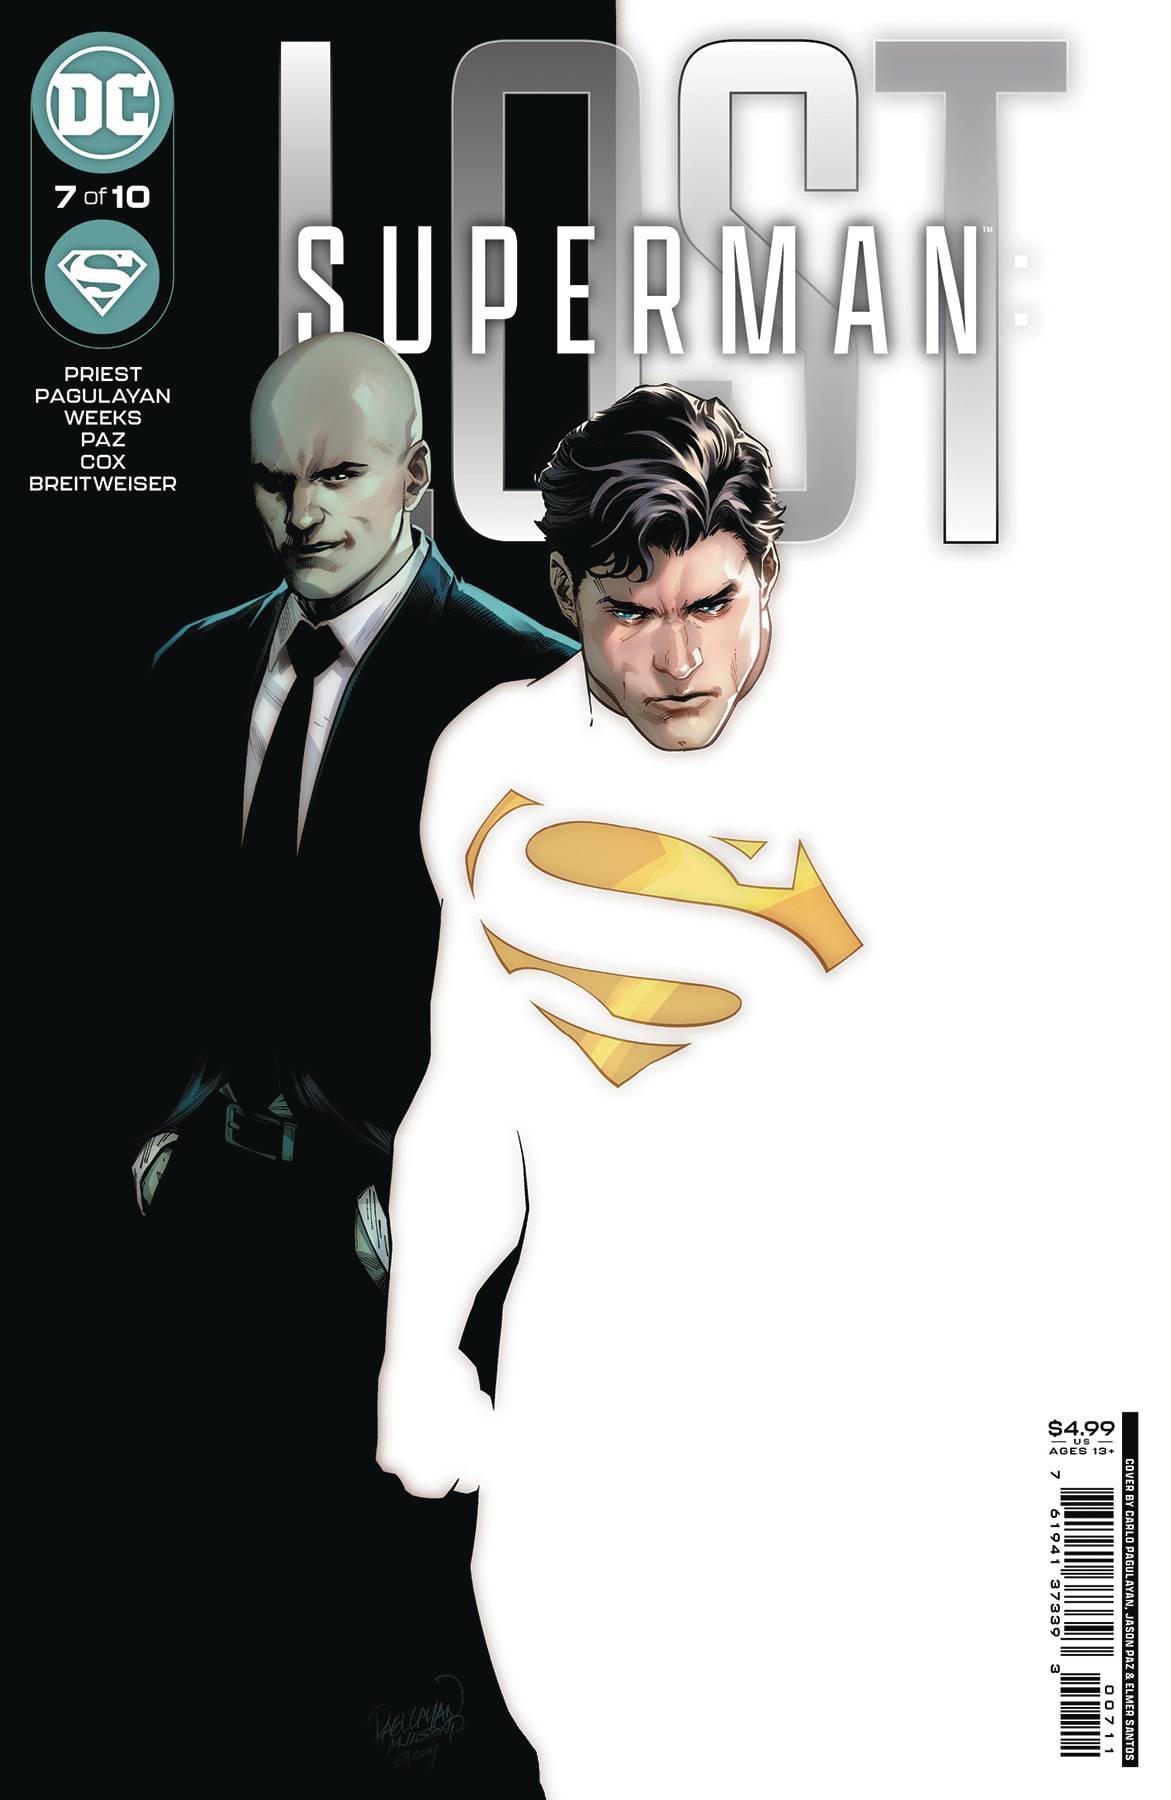 SUPERMAN LOST #7 (OF 10)